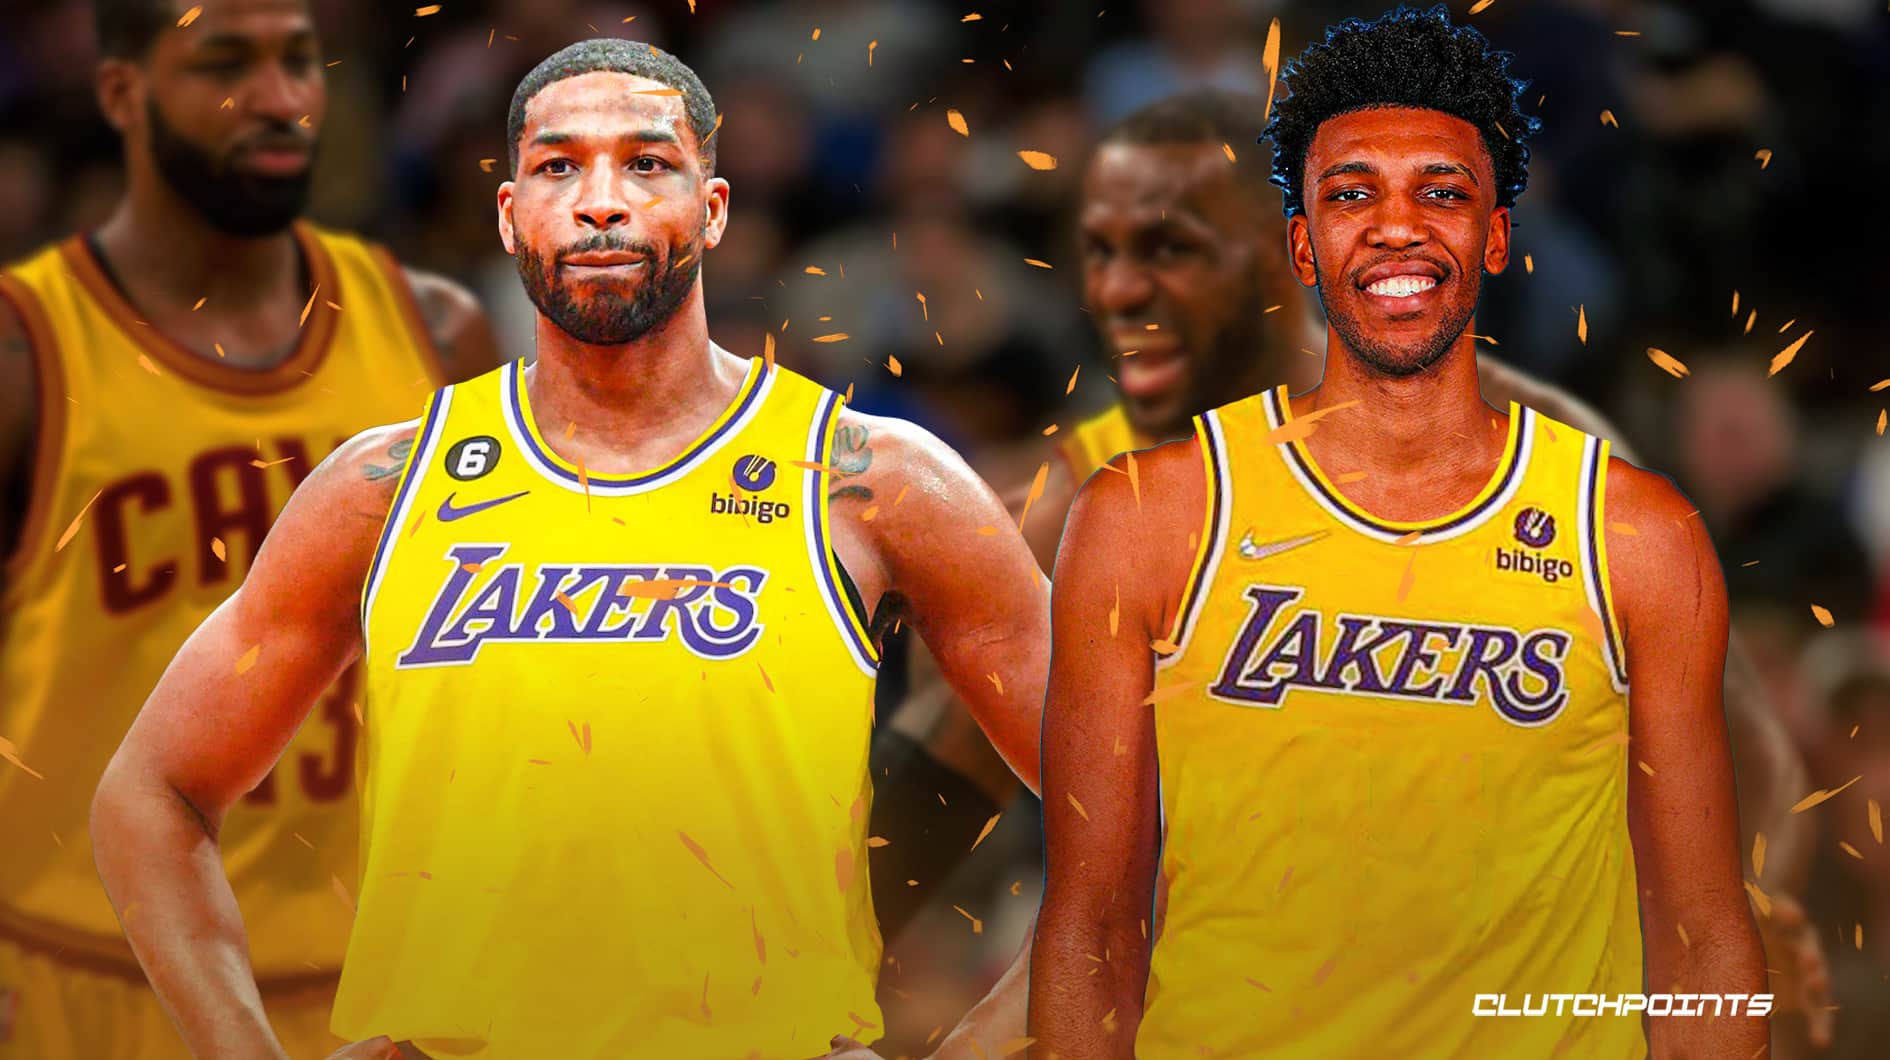 NBA Rumors: Could Tristan Thompson End Up With Lakers Via Buyout?